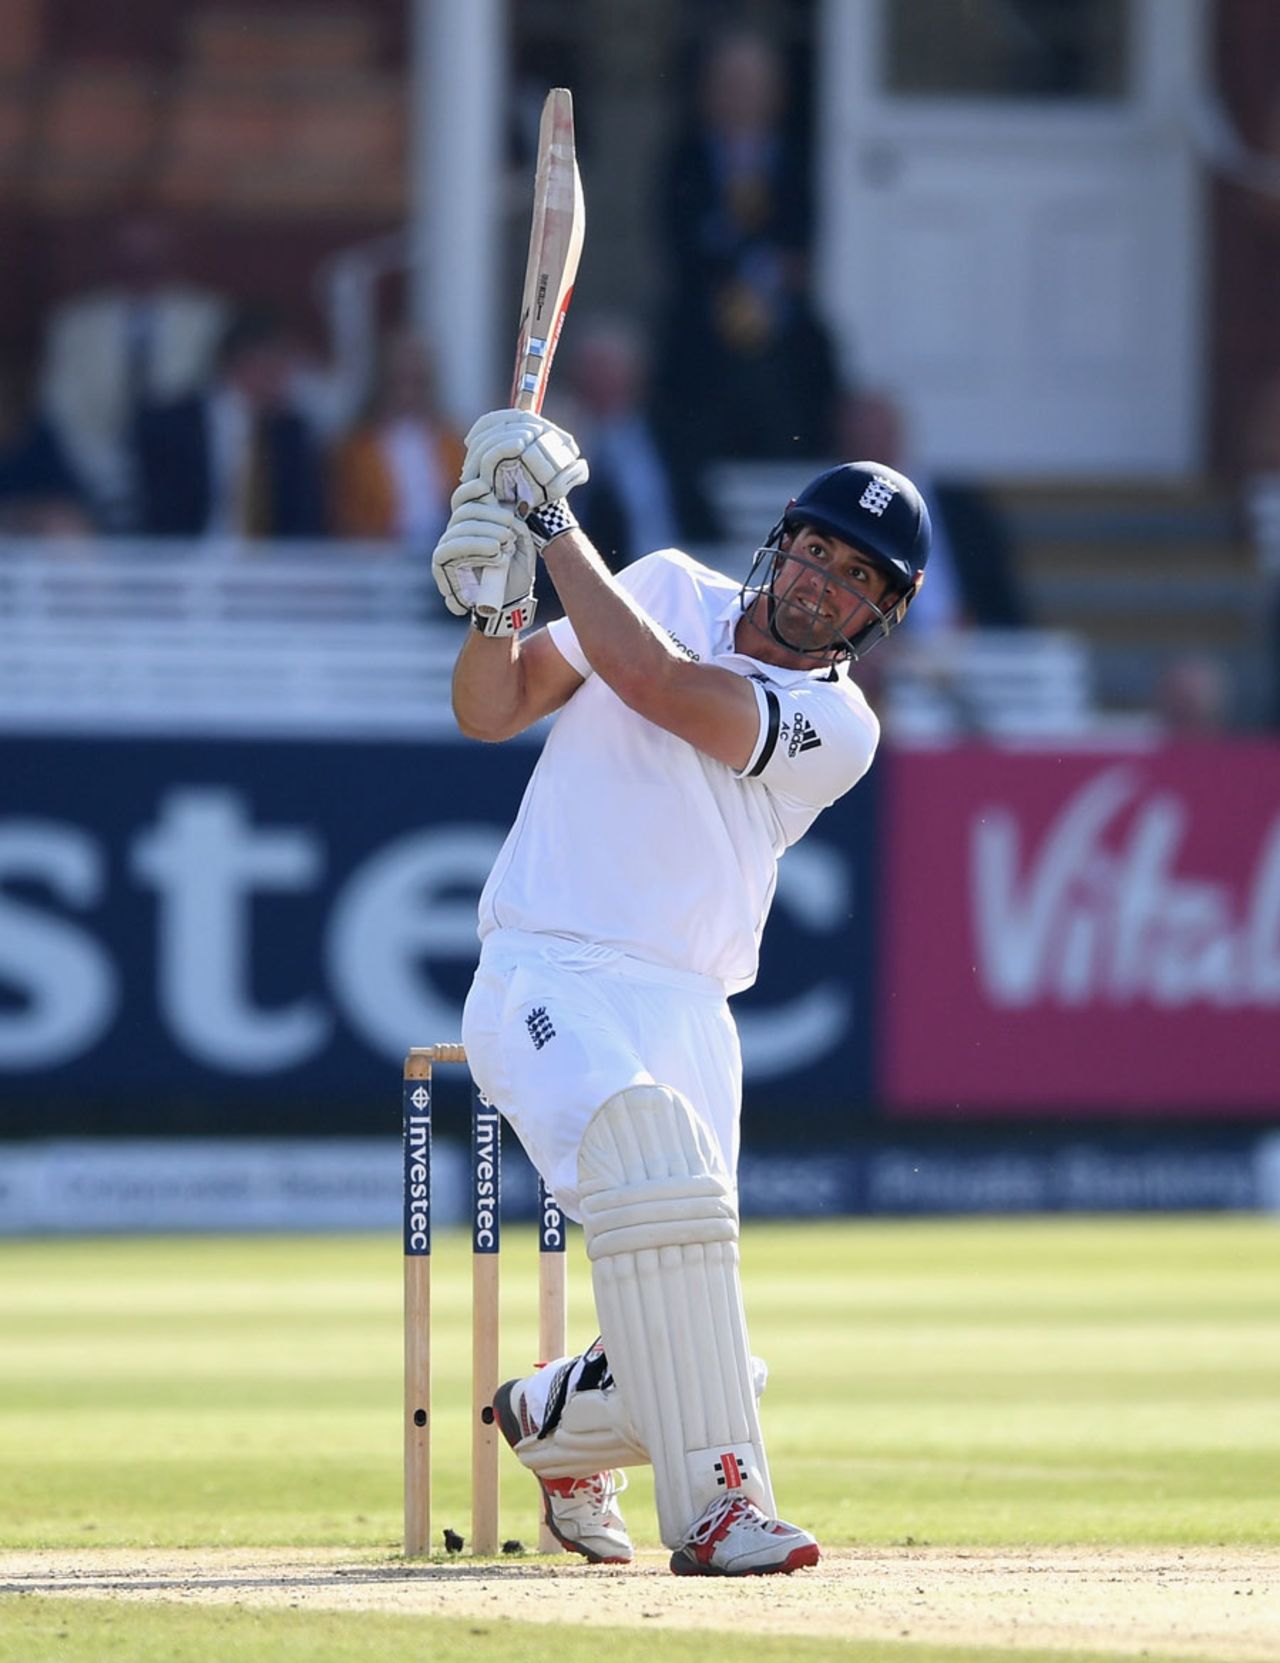 Alastair Cook crunched a big six over deep midwicket, England v Sri Lanka, 3rd Investec Test, Lord's, 4th day, June 12, 2016